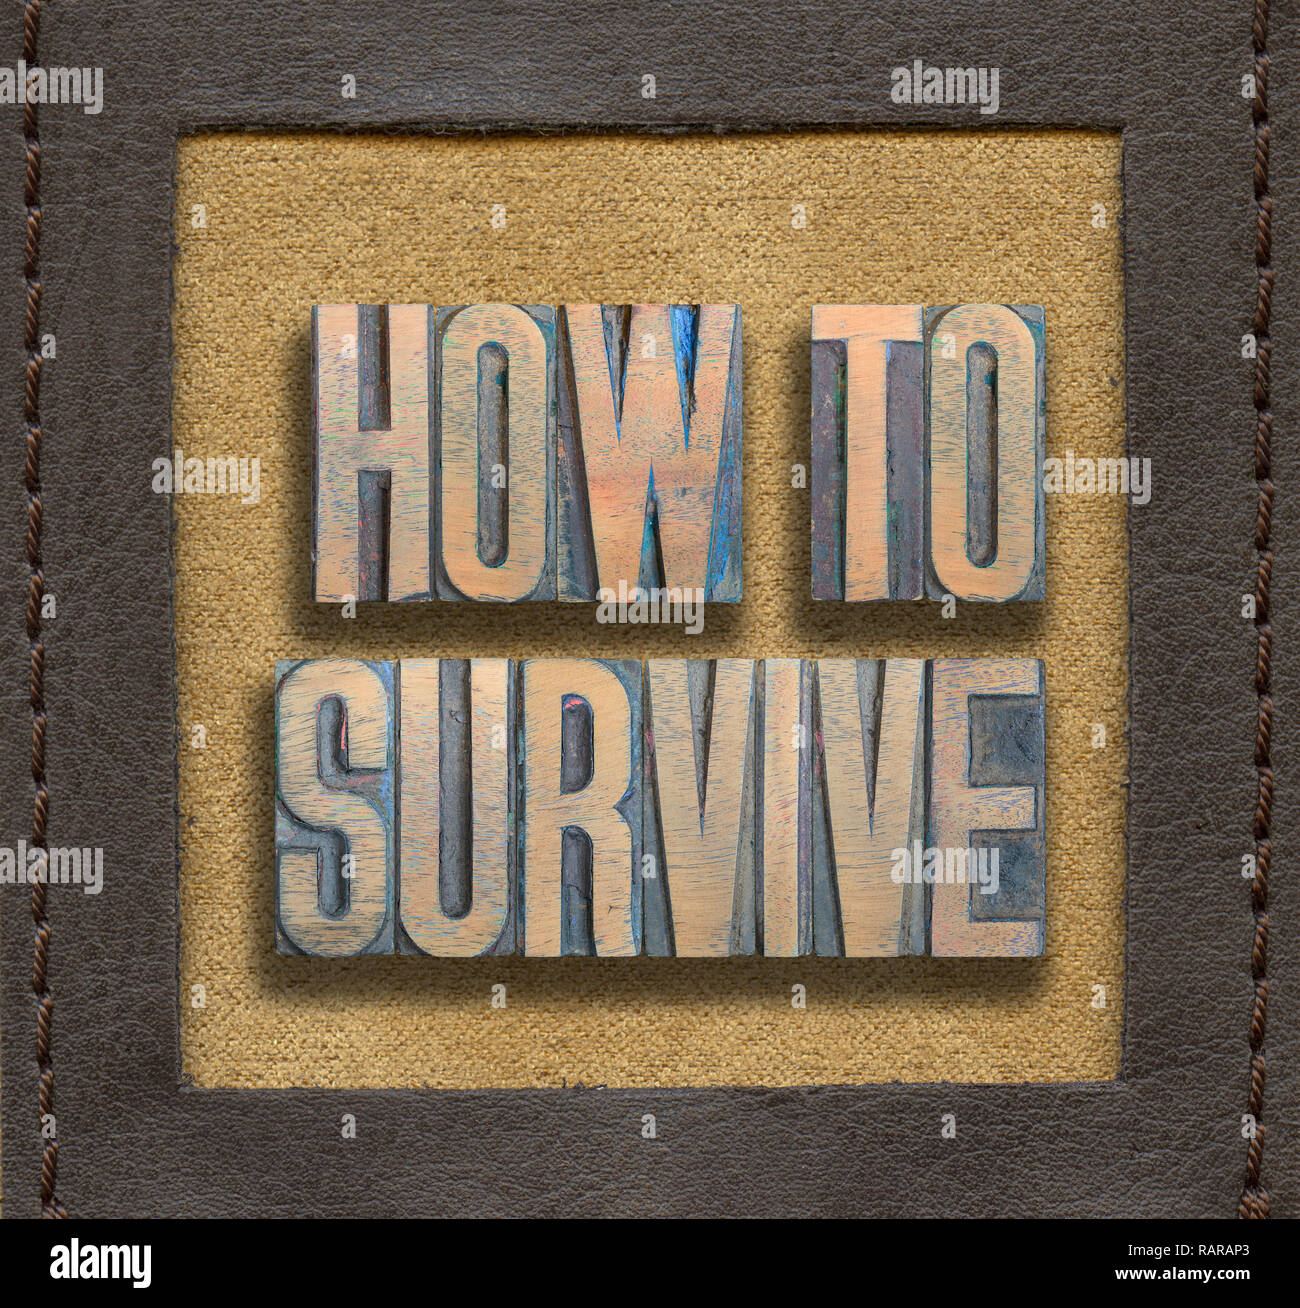 how to survive phrase made from vintage wooden letterpress inside stitched leather frame Stock Photo